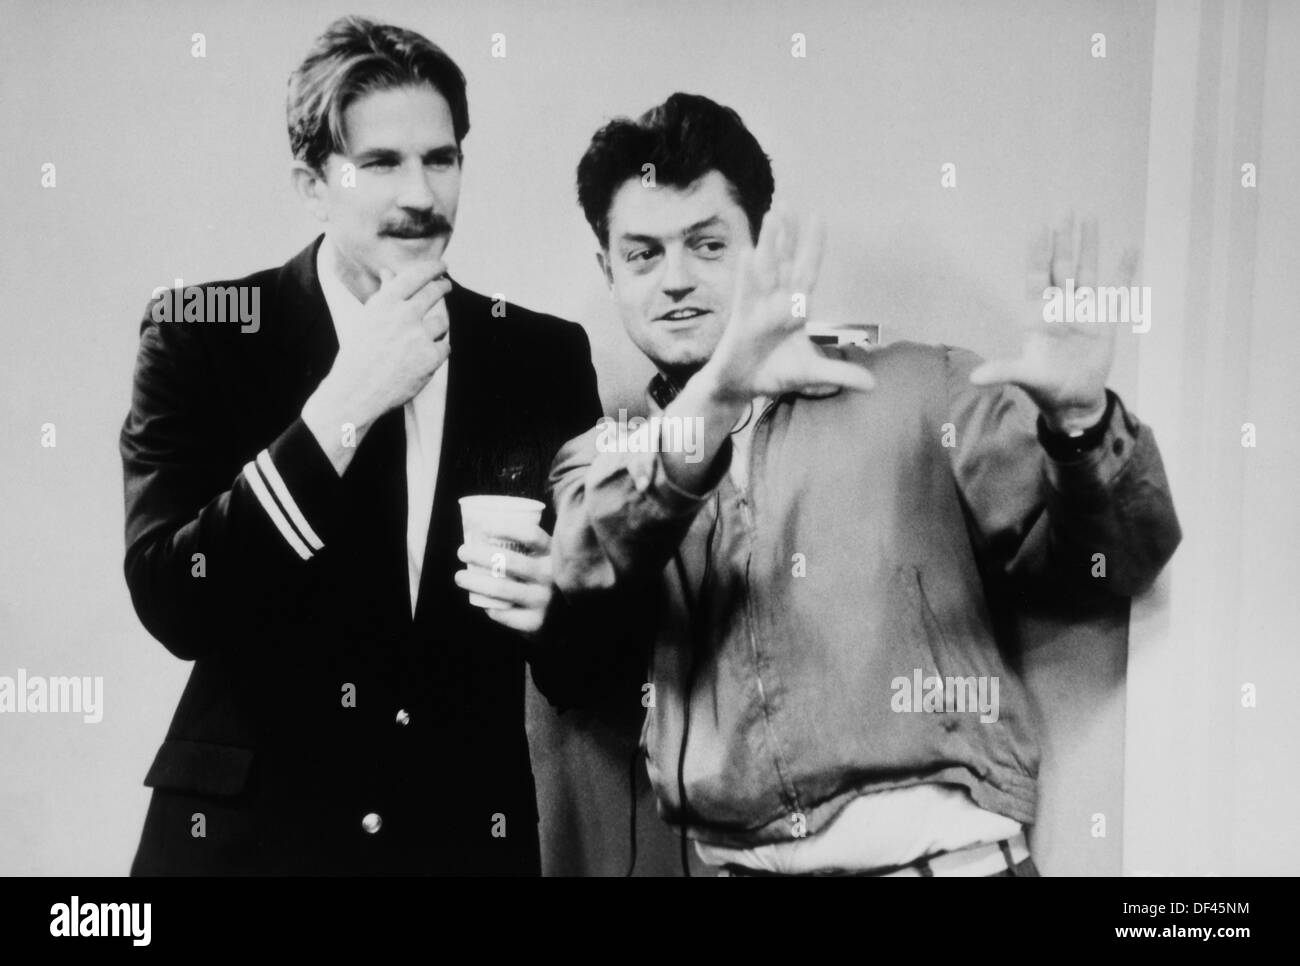 Director Jonathan Demme Directing Matthew Modine on-set of the Film, 'Married to the Mob', Mysterious Arts with Distribution via Orion Pictures, 1988 Stock Photo